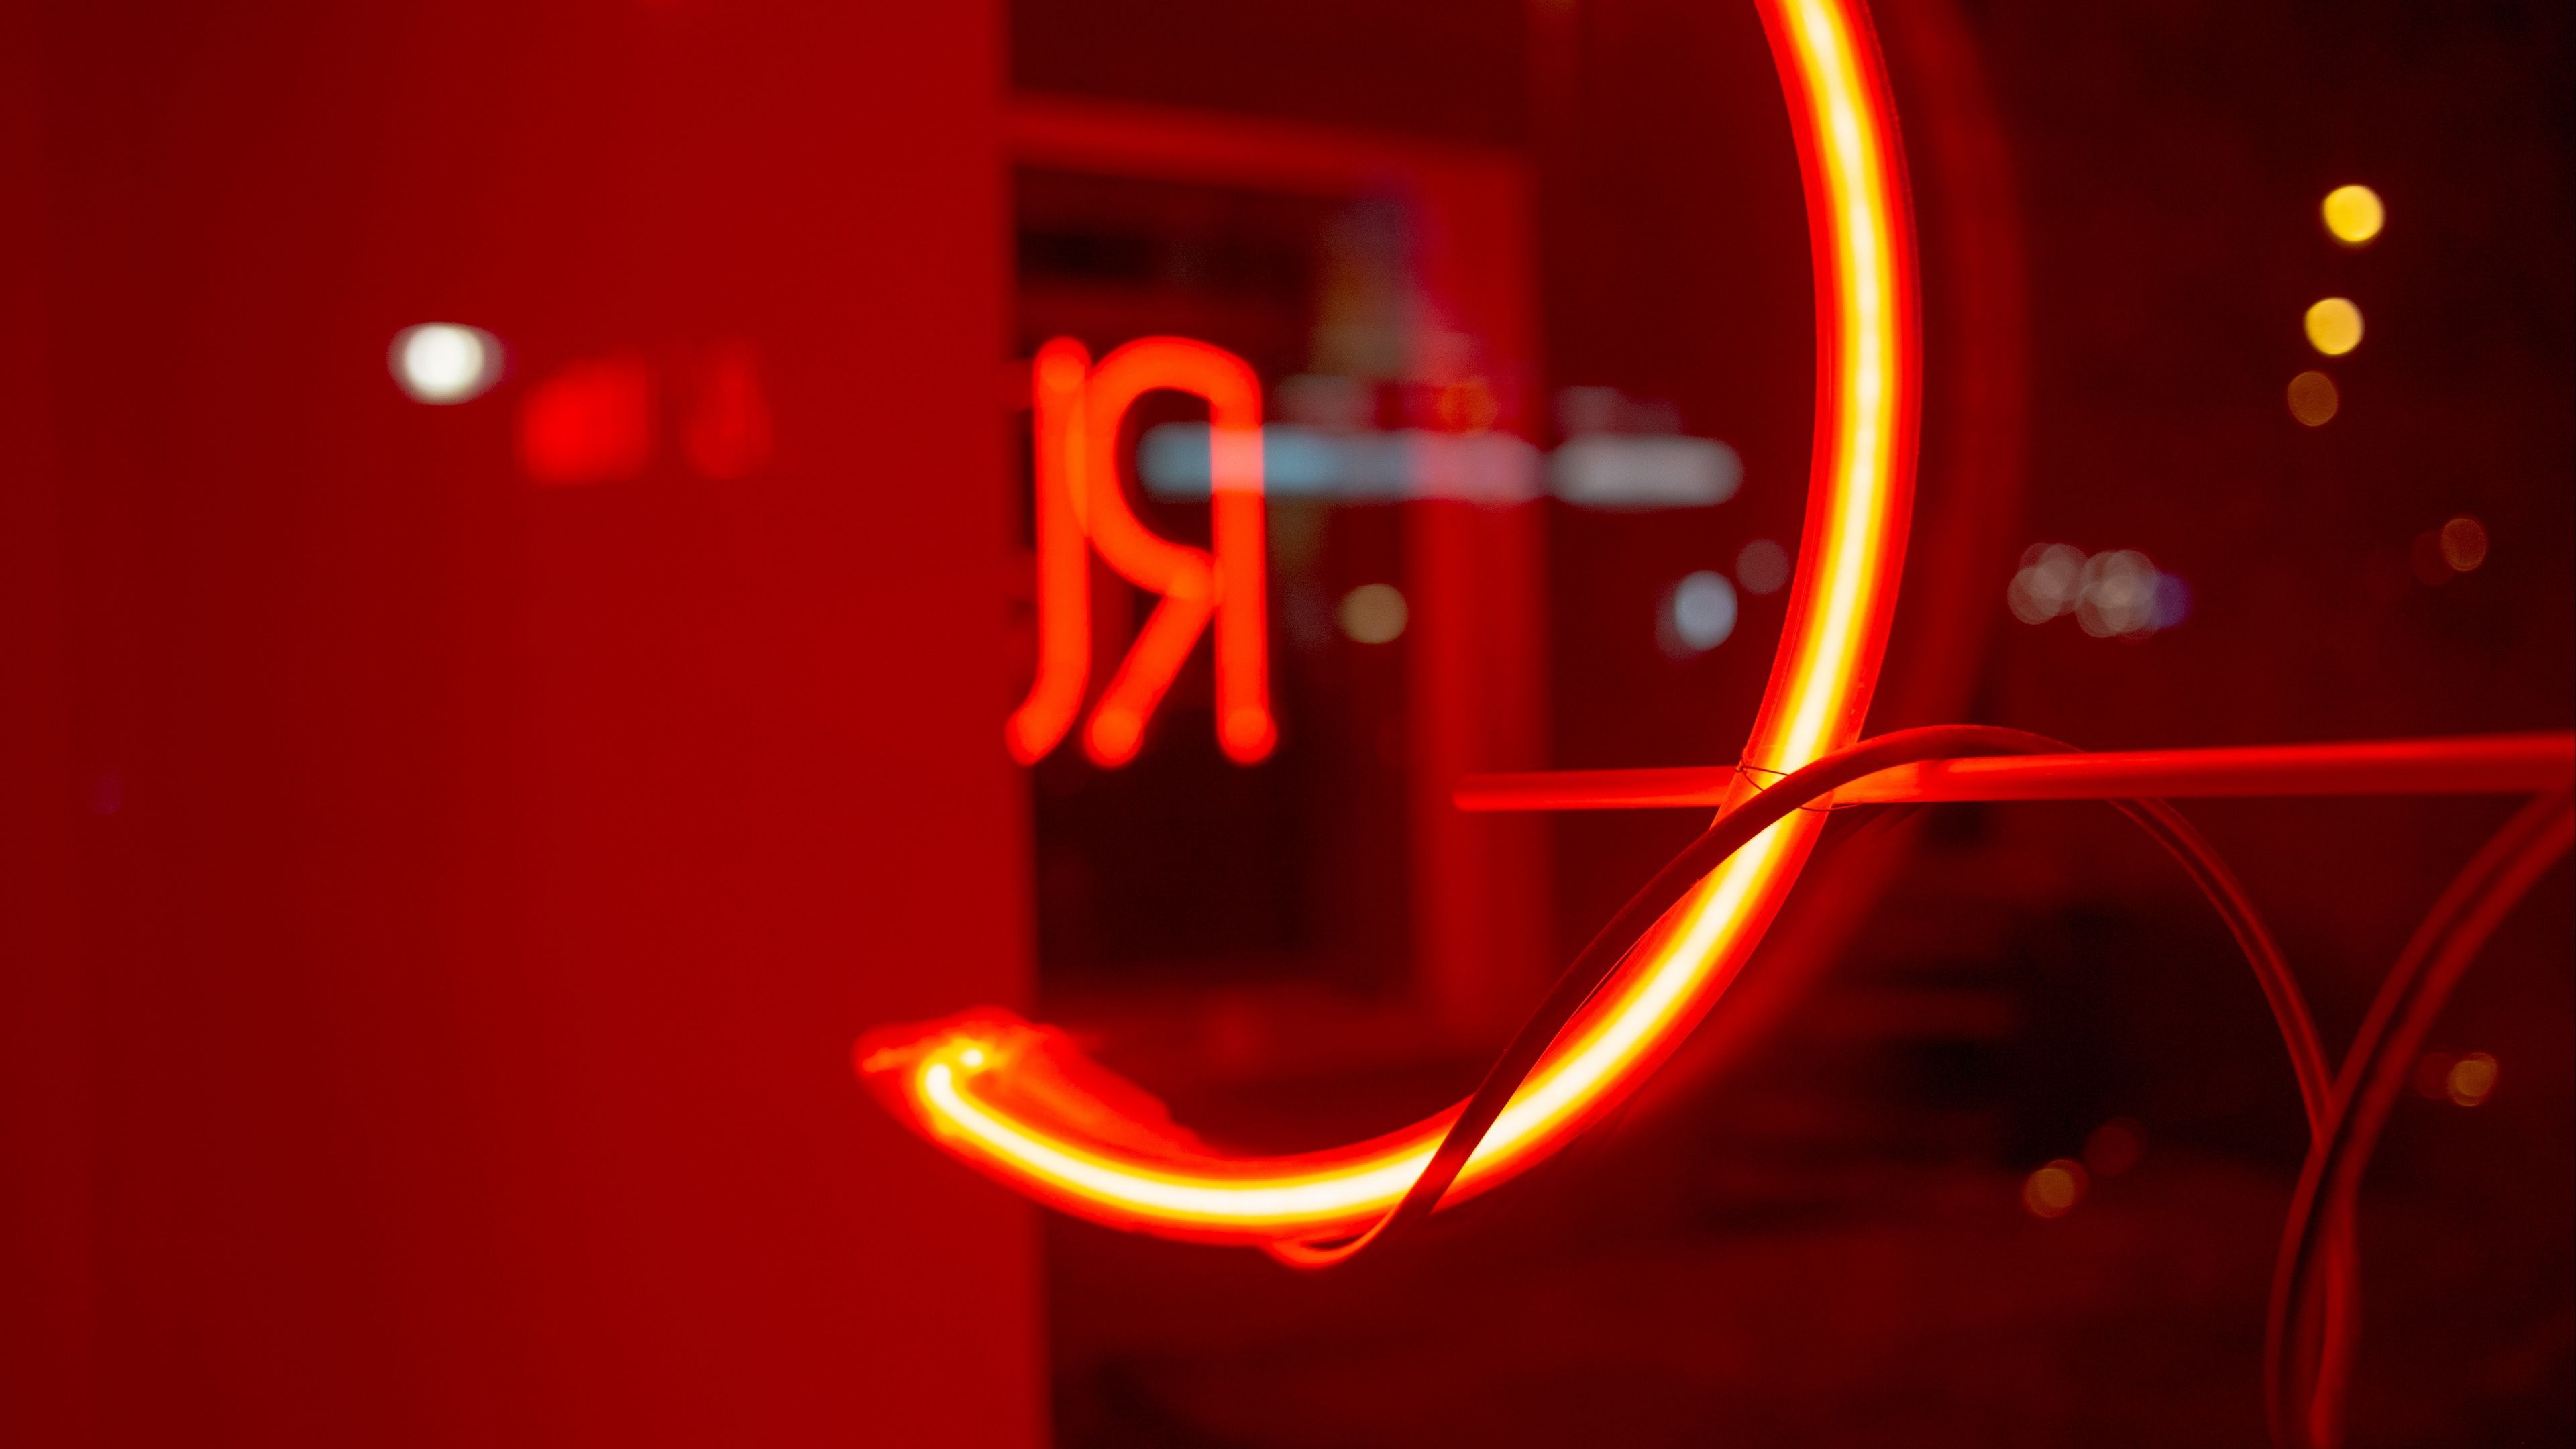 A neon light that is red and round - Neon red